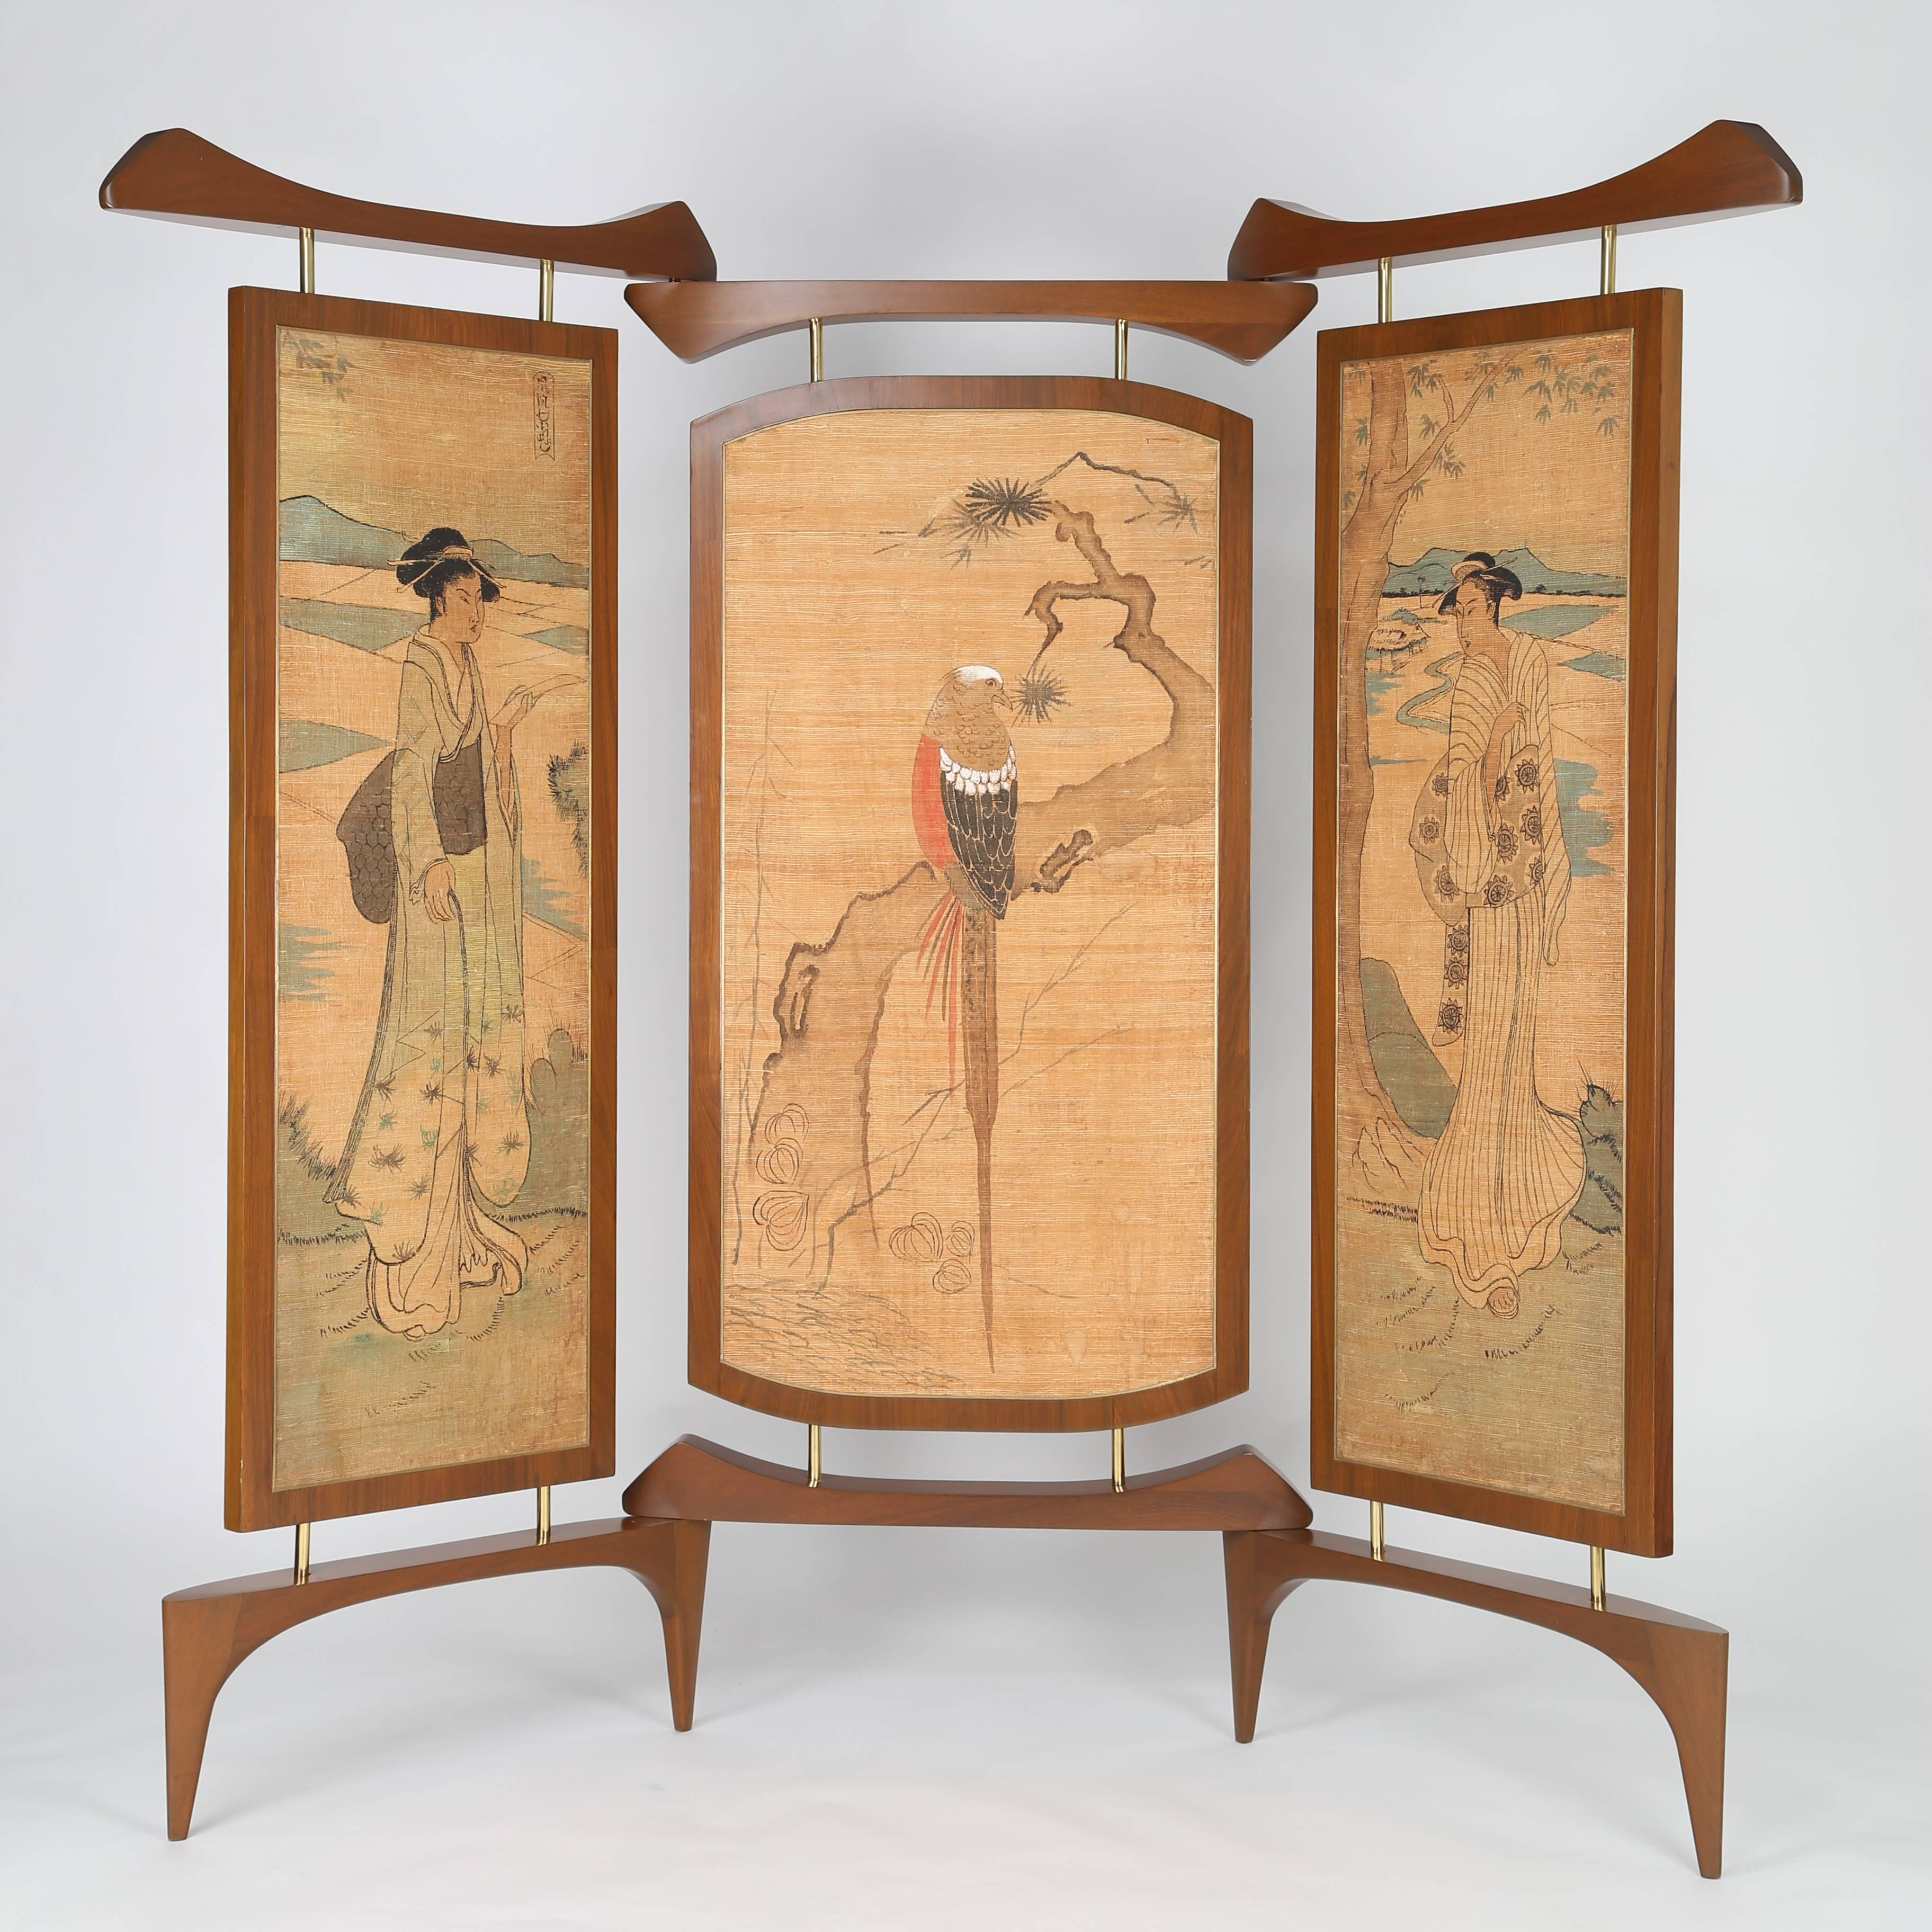 Extraordinary 1950s three-panel screen by interior designer, industrial designer and sculptor Frank Kyle (1914-1992), a native of Minneapolis who worked much of his career in California and Mexico City. One side of the screen features inlaid bronze